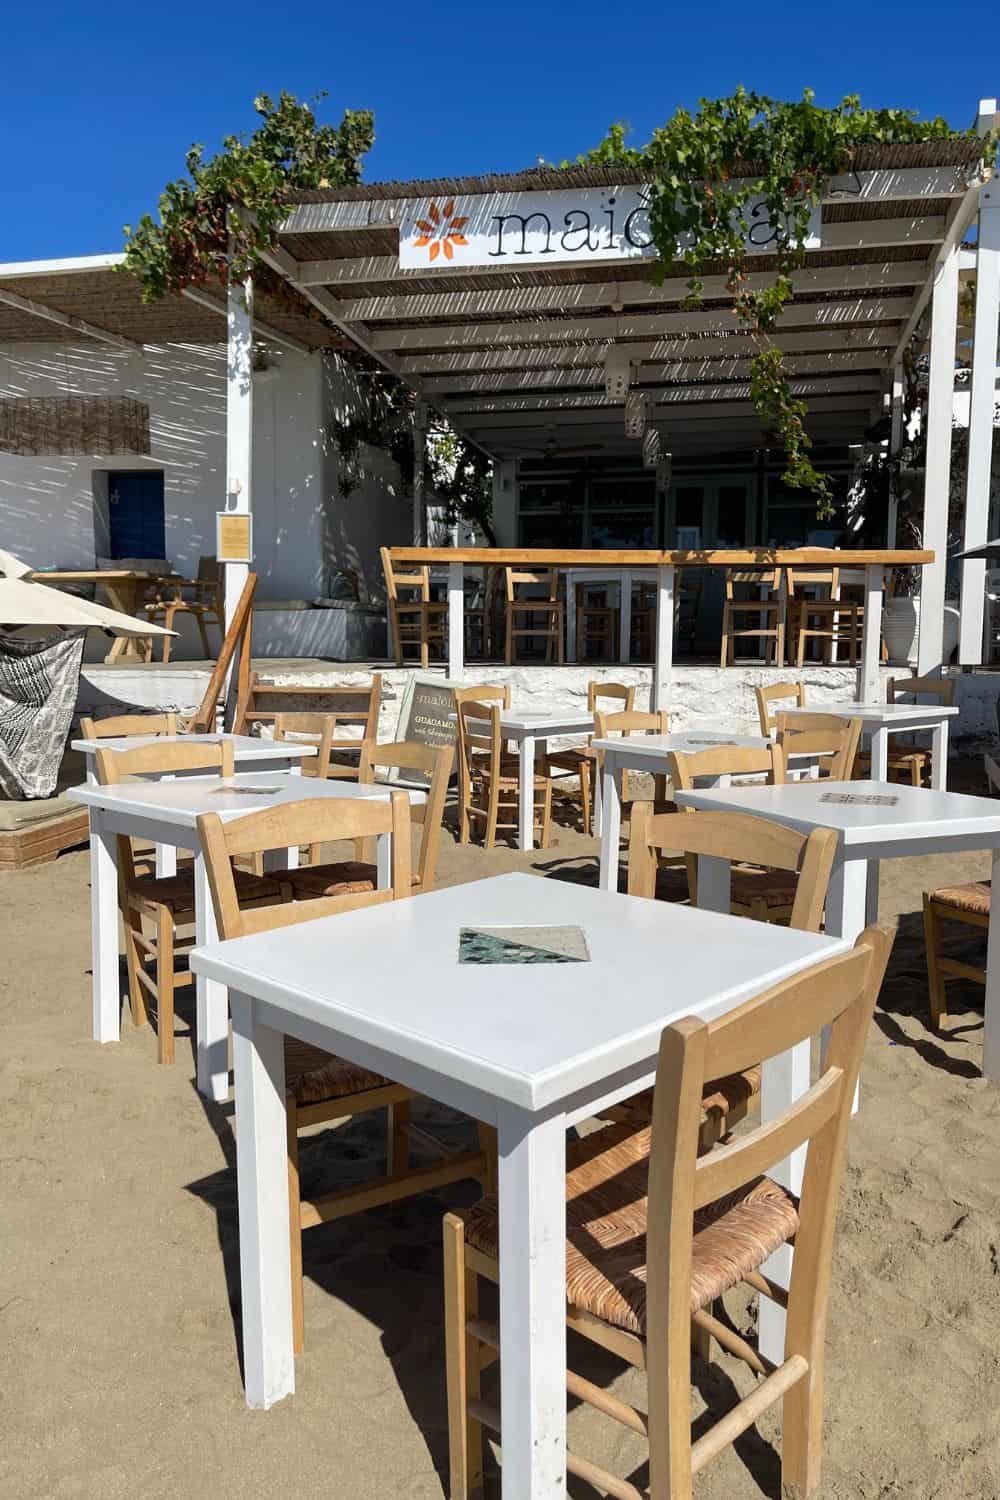 A beachside restaurant named 'Maiolica' basks in the sunlight, showcasing white tables with wooden chairs on sandy ground, ready to welcome diners with its charming, open-air ambiance.